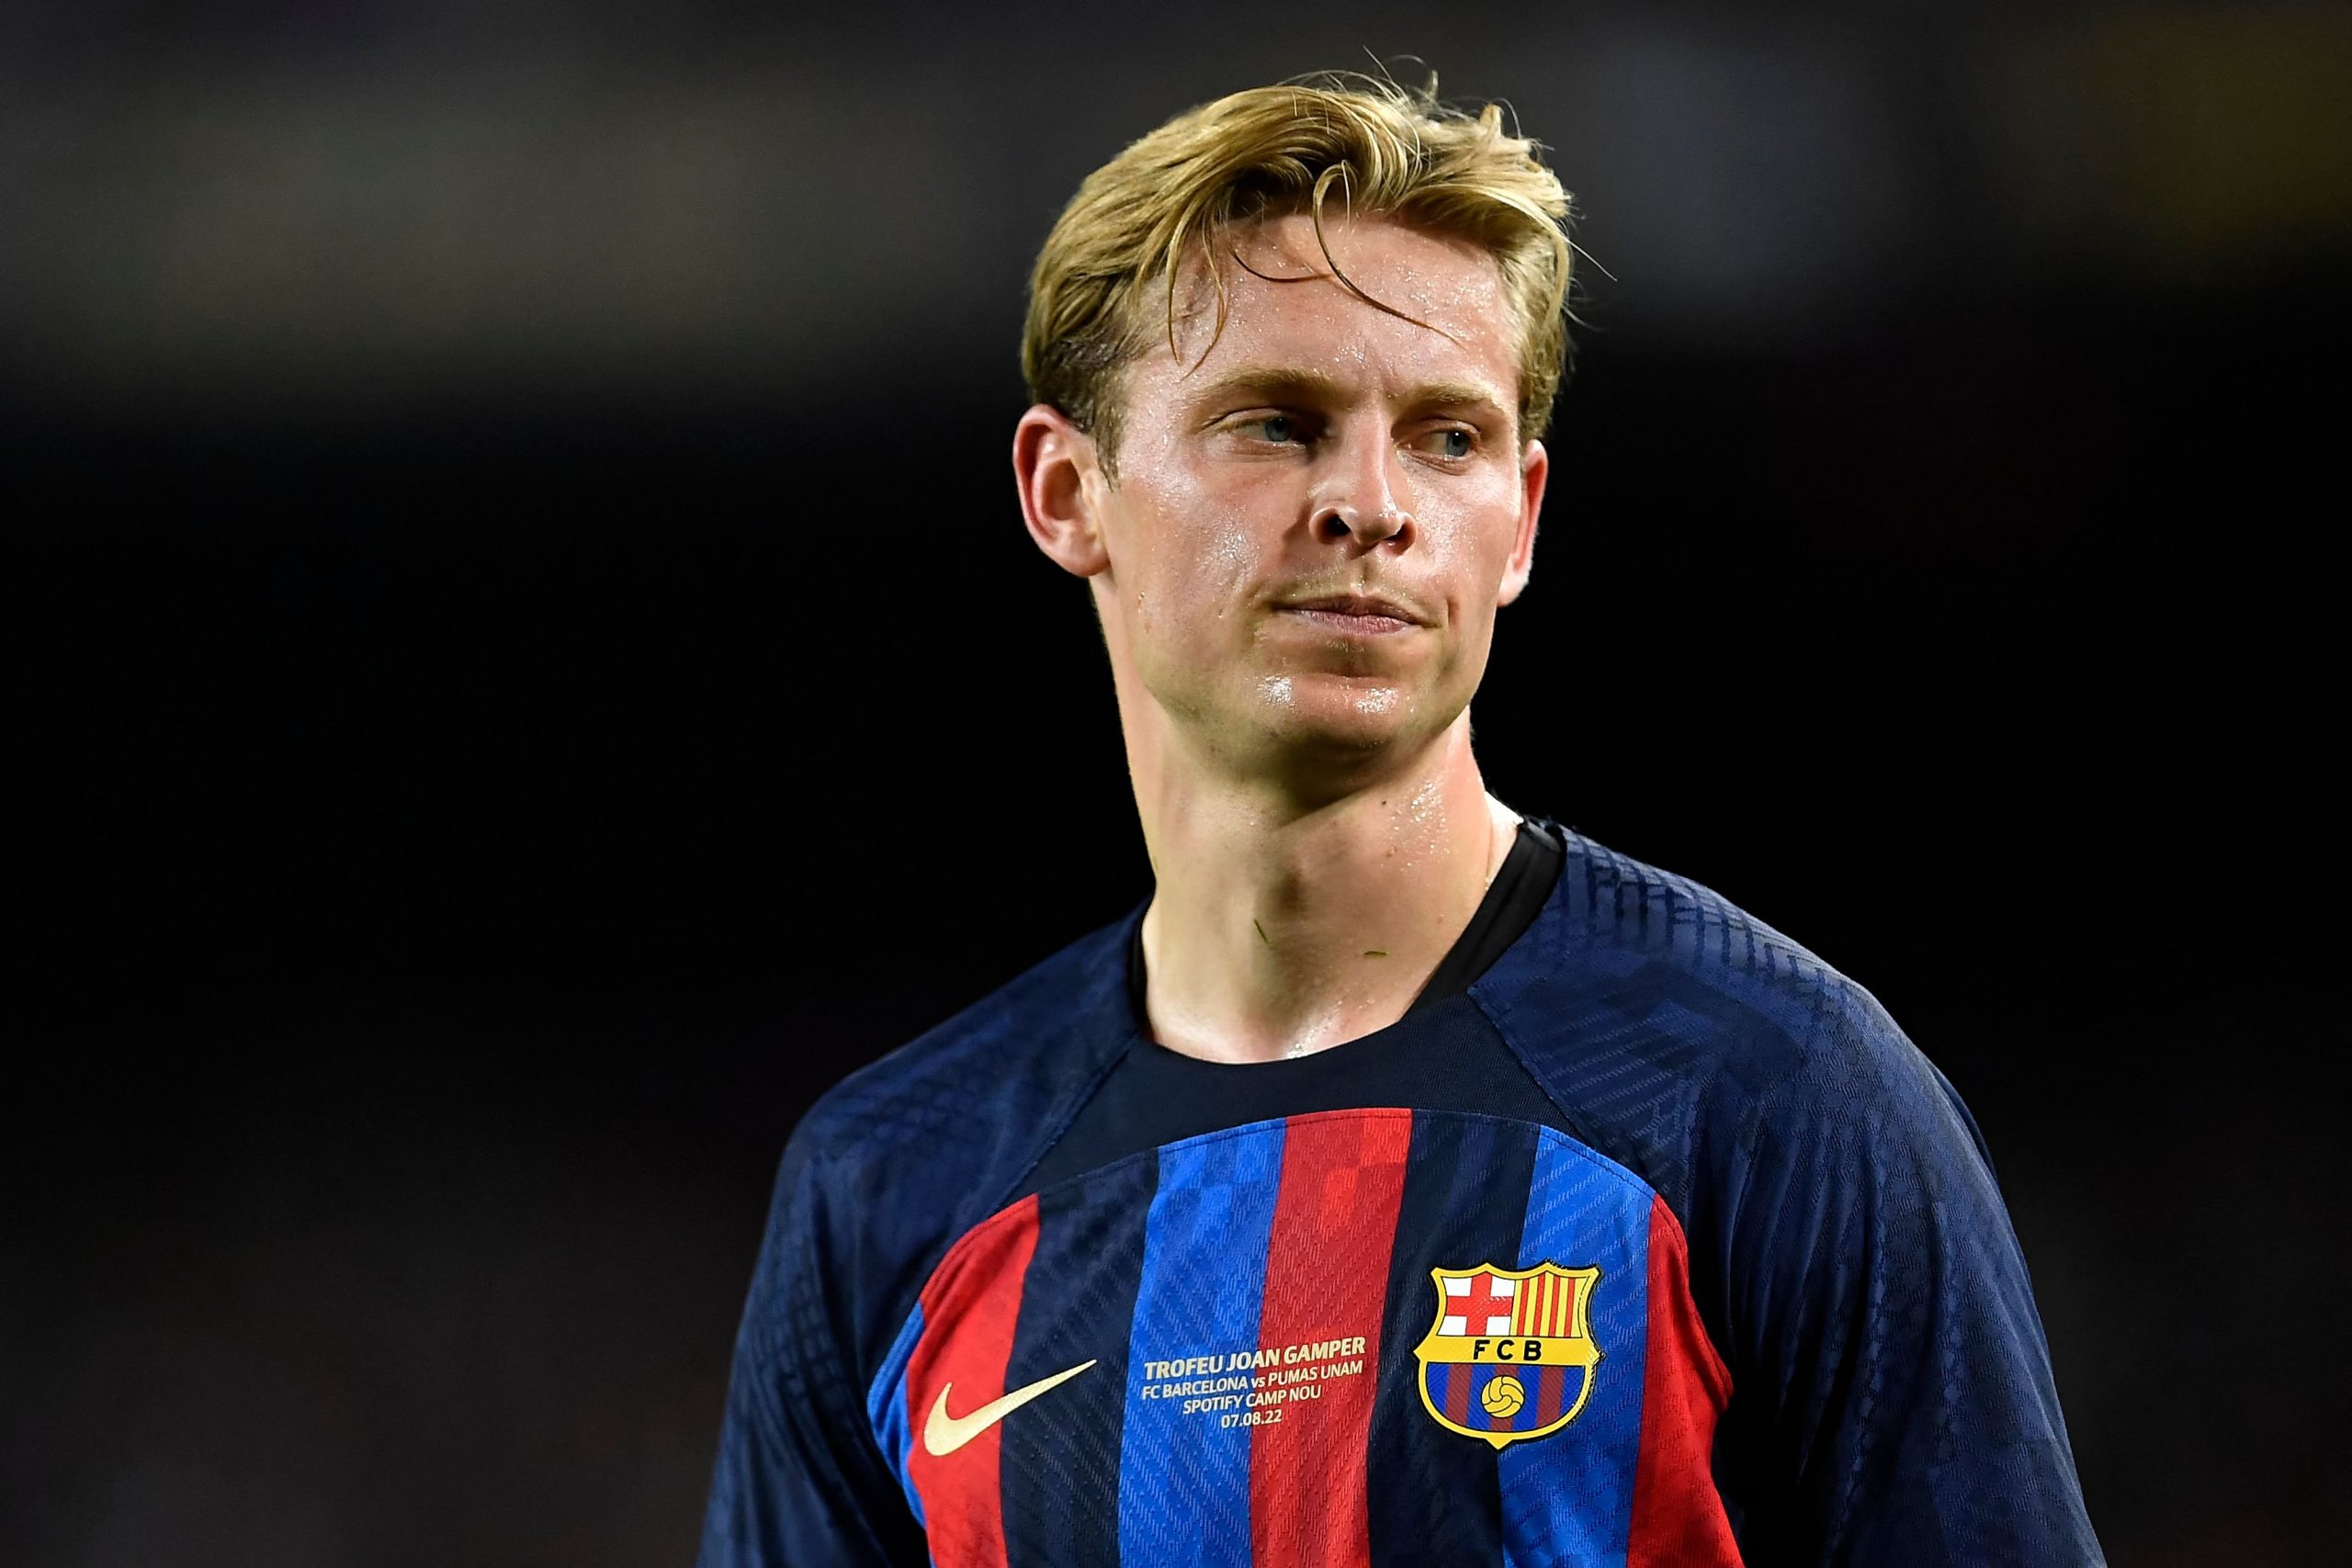 Frenkie De Jong is relecutant  to come to Manchester United. (Photo by PAU BARRENA/AFP via Getty Images)